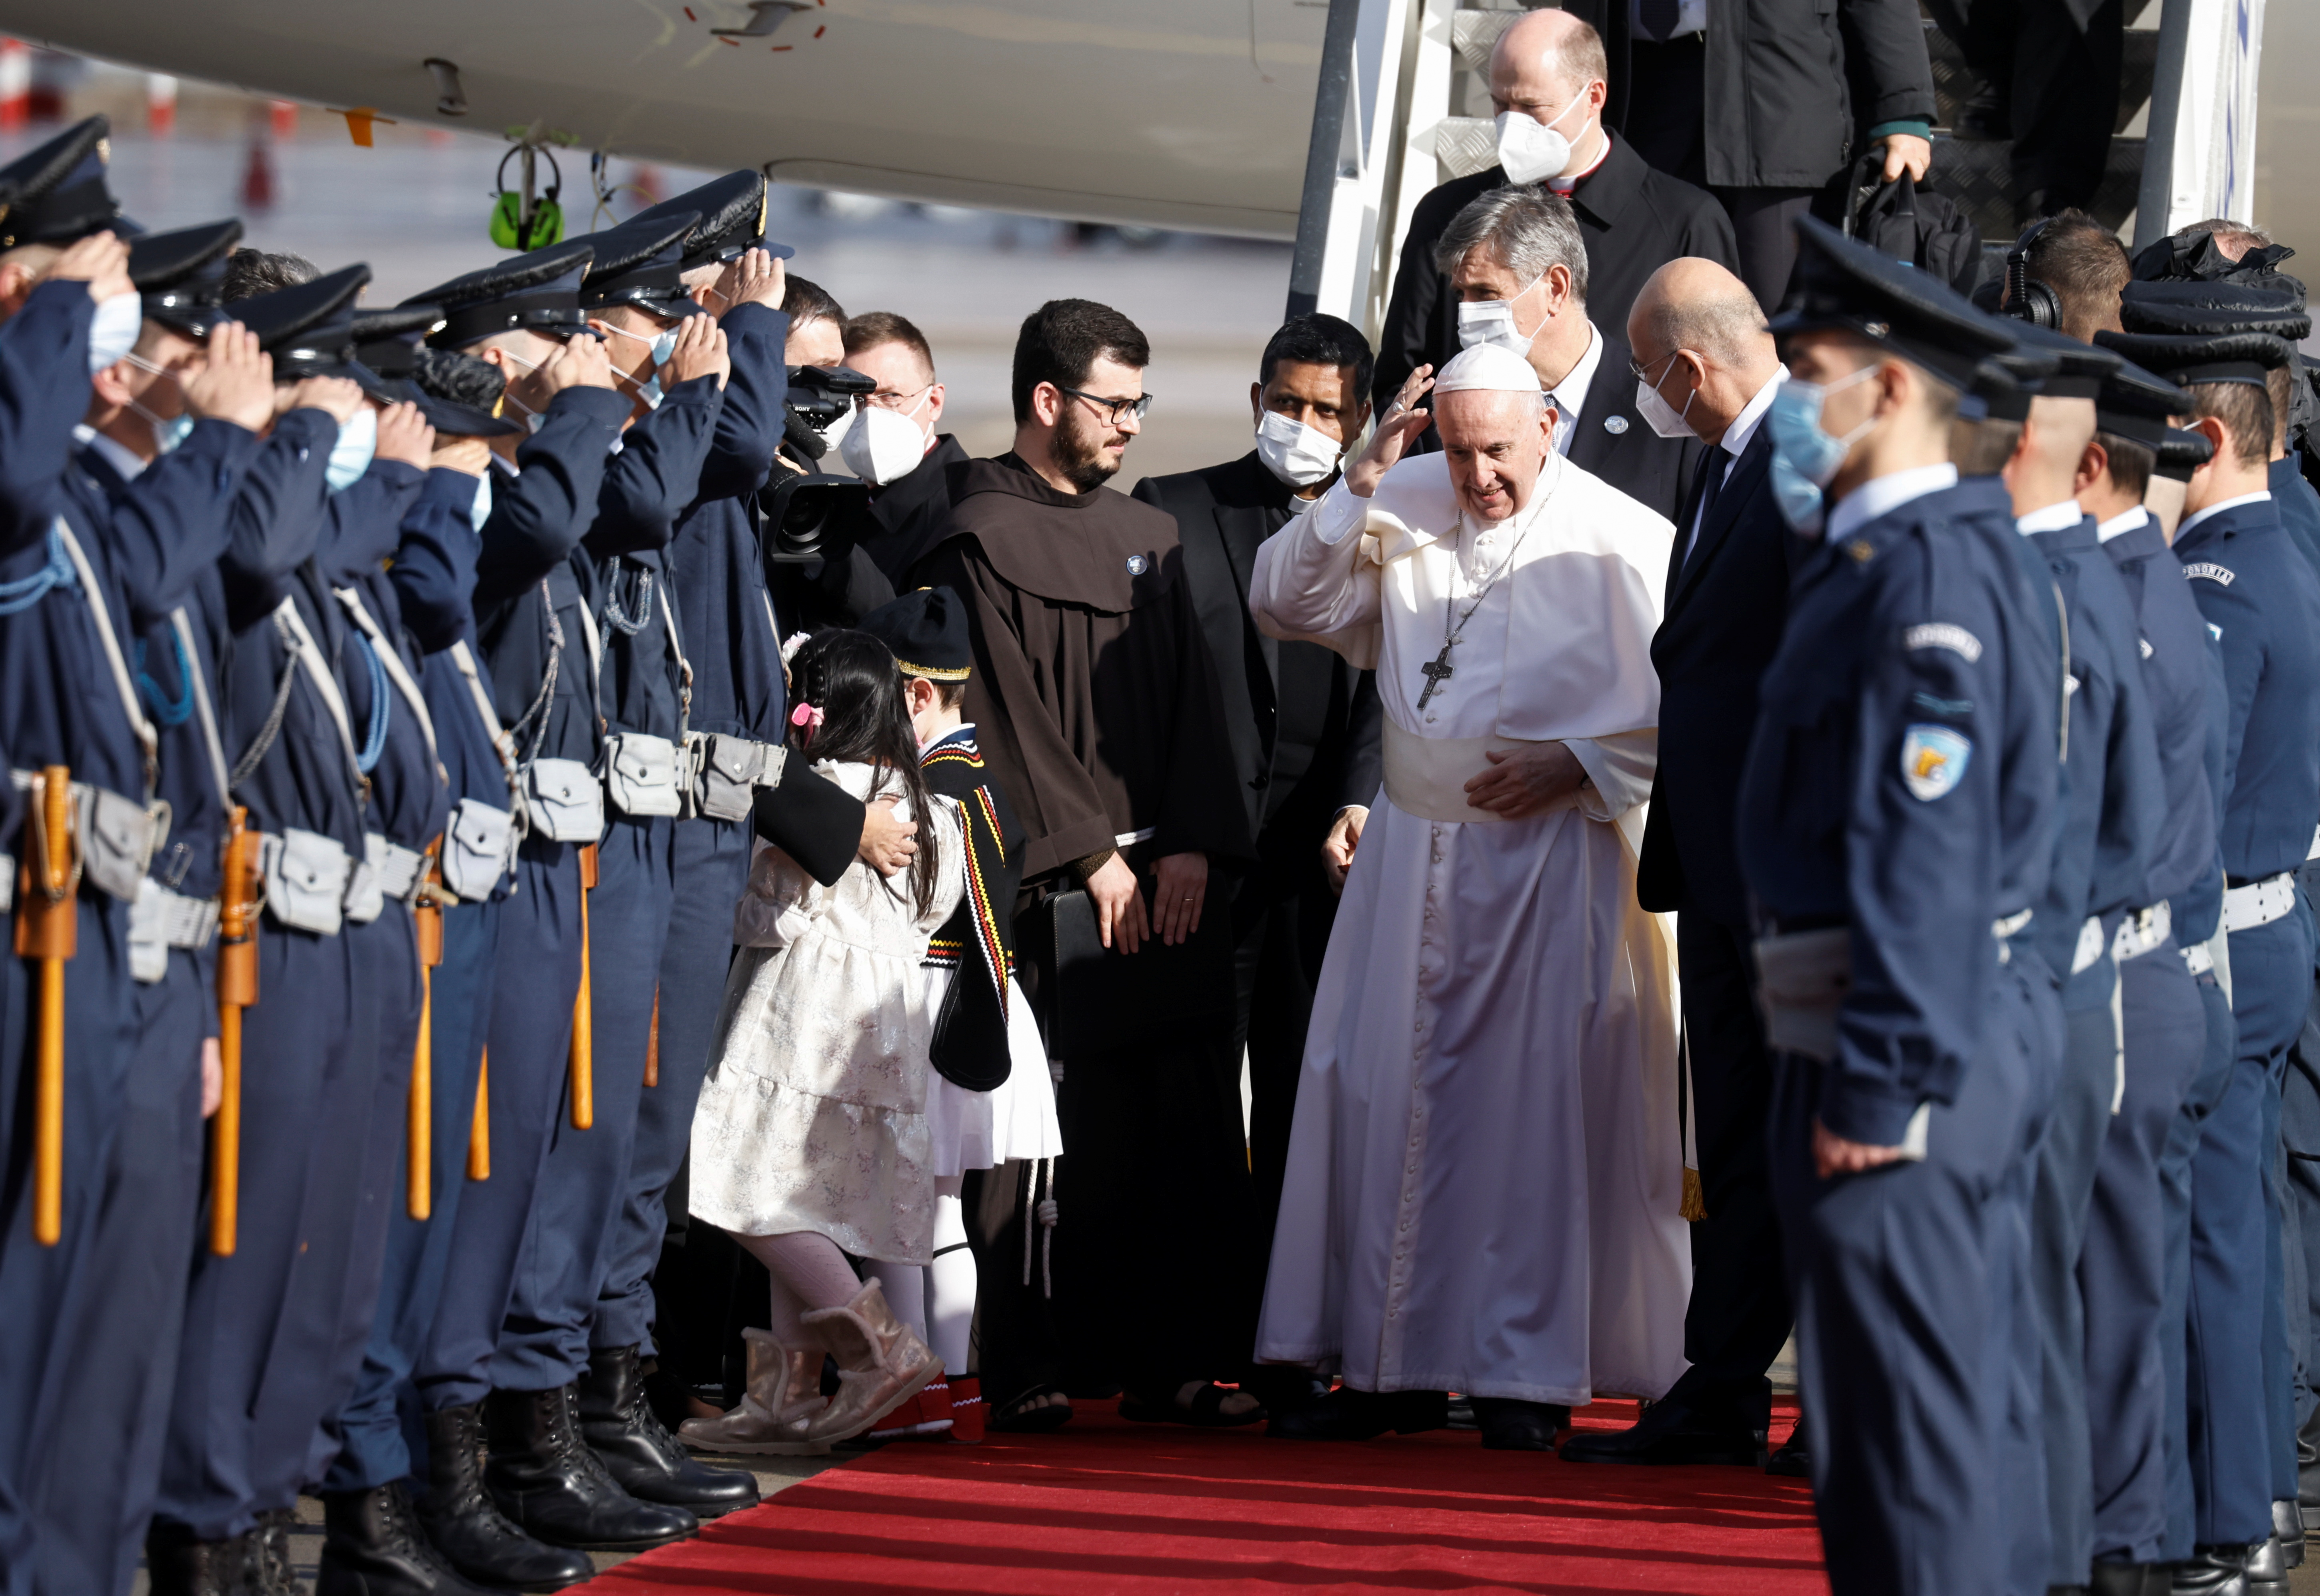 Pope Francis is welcomed by Greek Foreign Minister Nikos Dendias at Athens International Airport in Athens, Greece, December 4, 2021. REUTERS/Alkis Konstantinidis